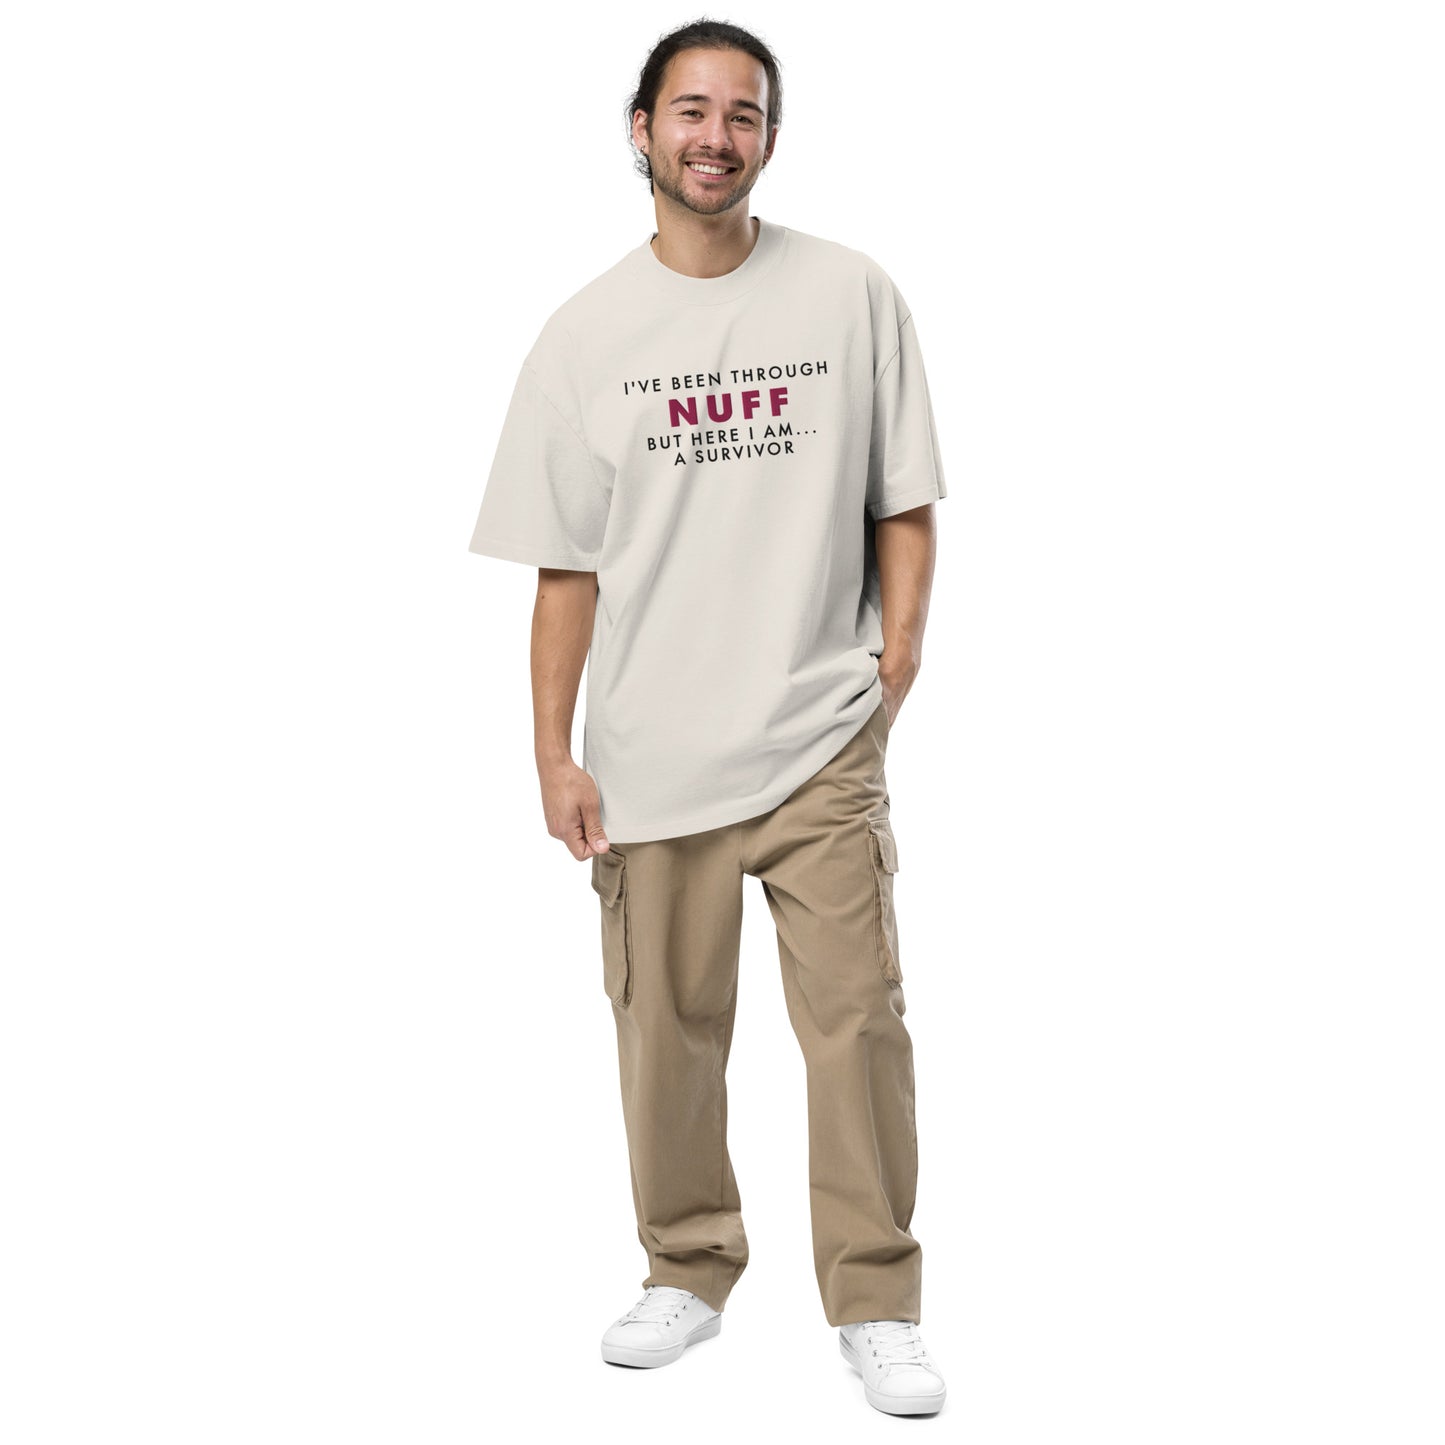 HERE I AM - Oversized Faded T-shirt